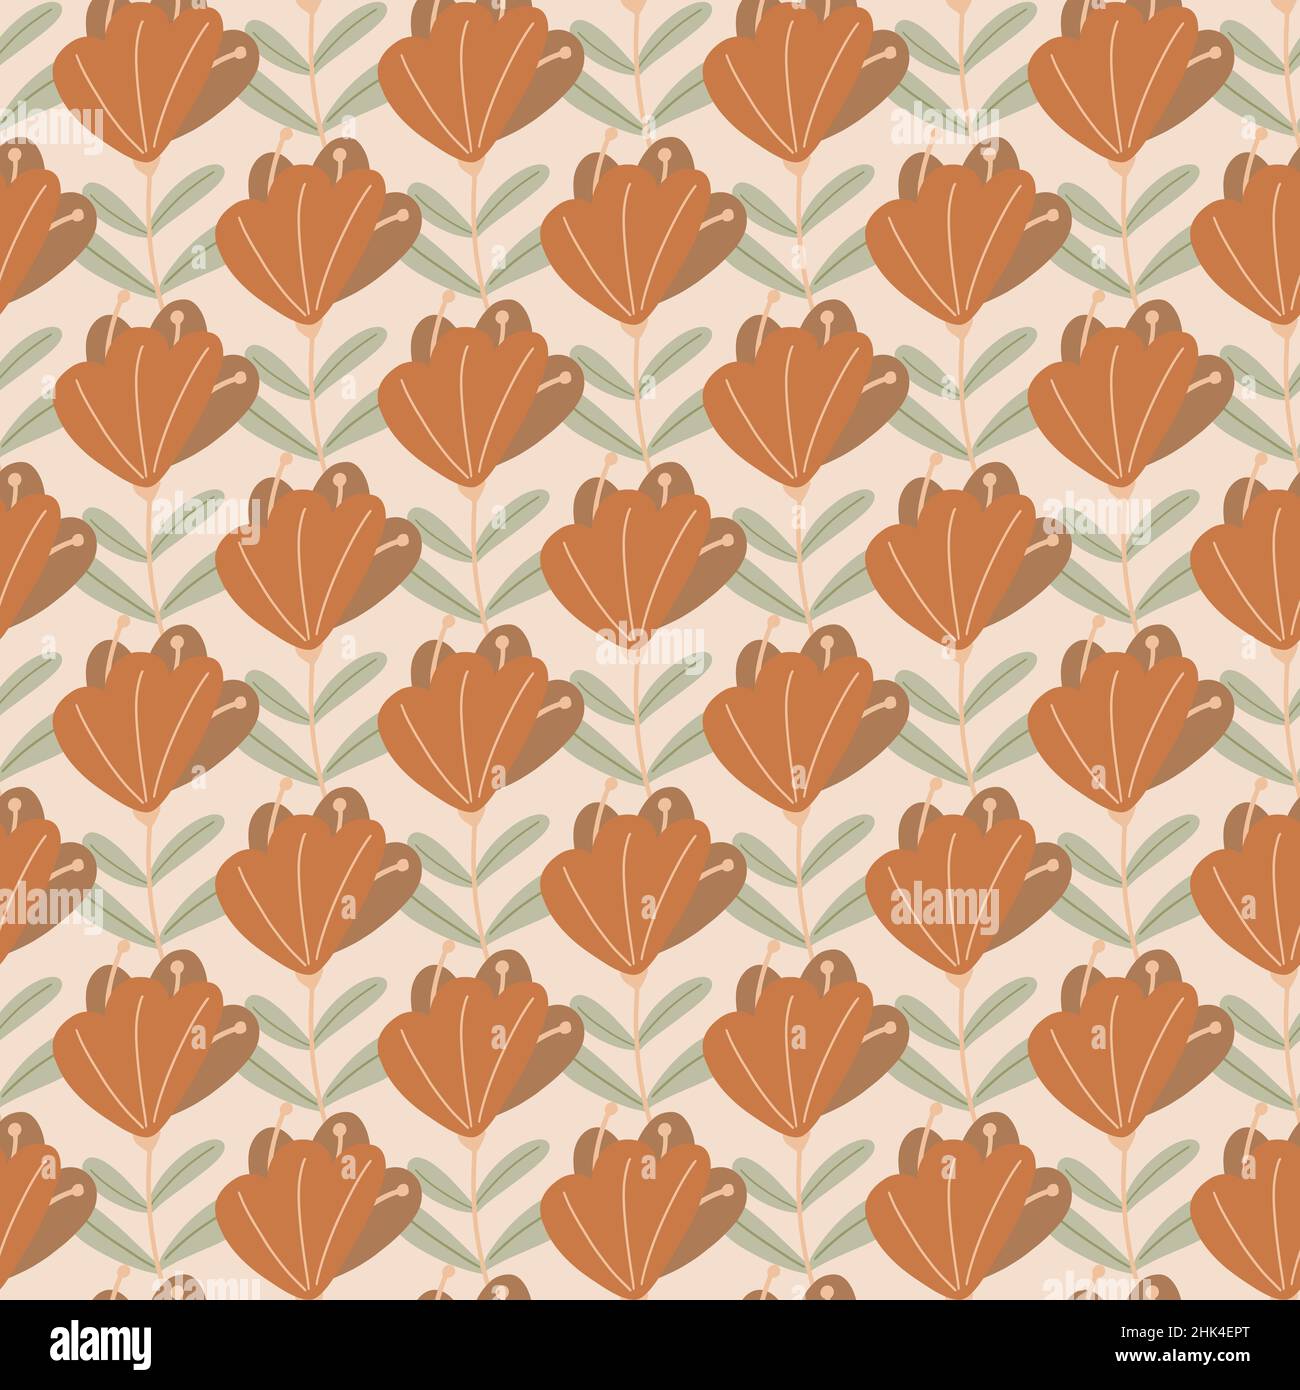 Orange colored doodle flowers elements seamless pattern. Grey background. Scrapbook elements. Stock illustration. Vector design for textile, fabric, g Stock Vector